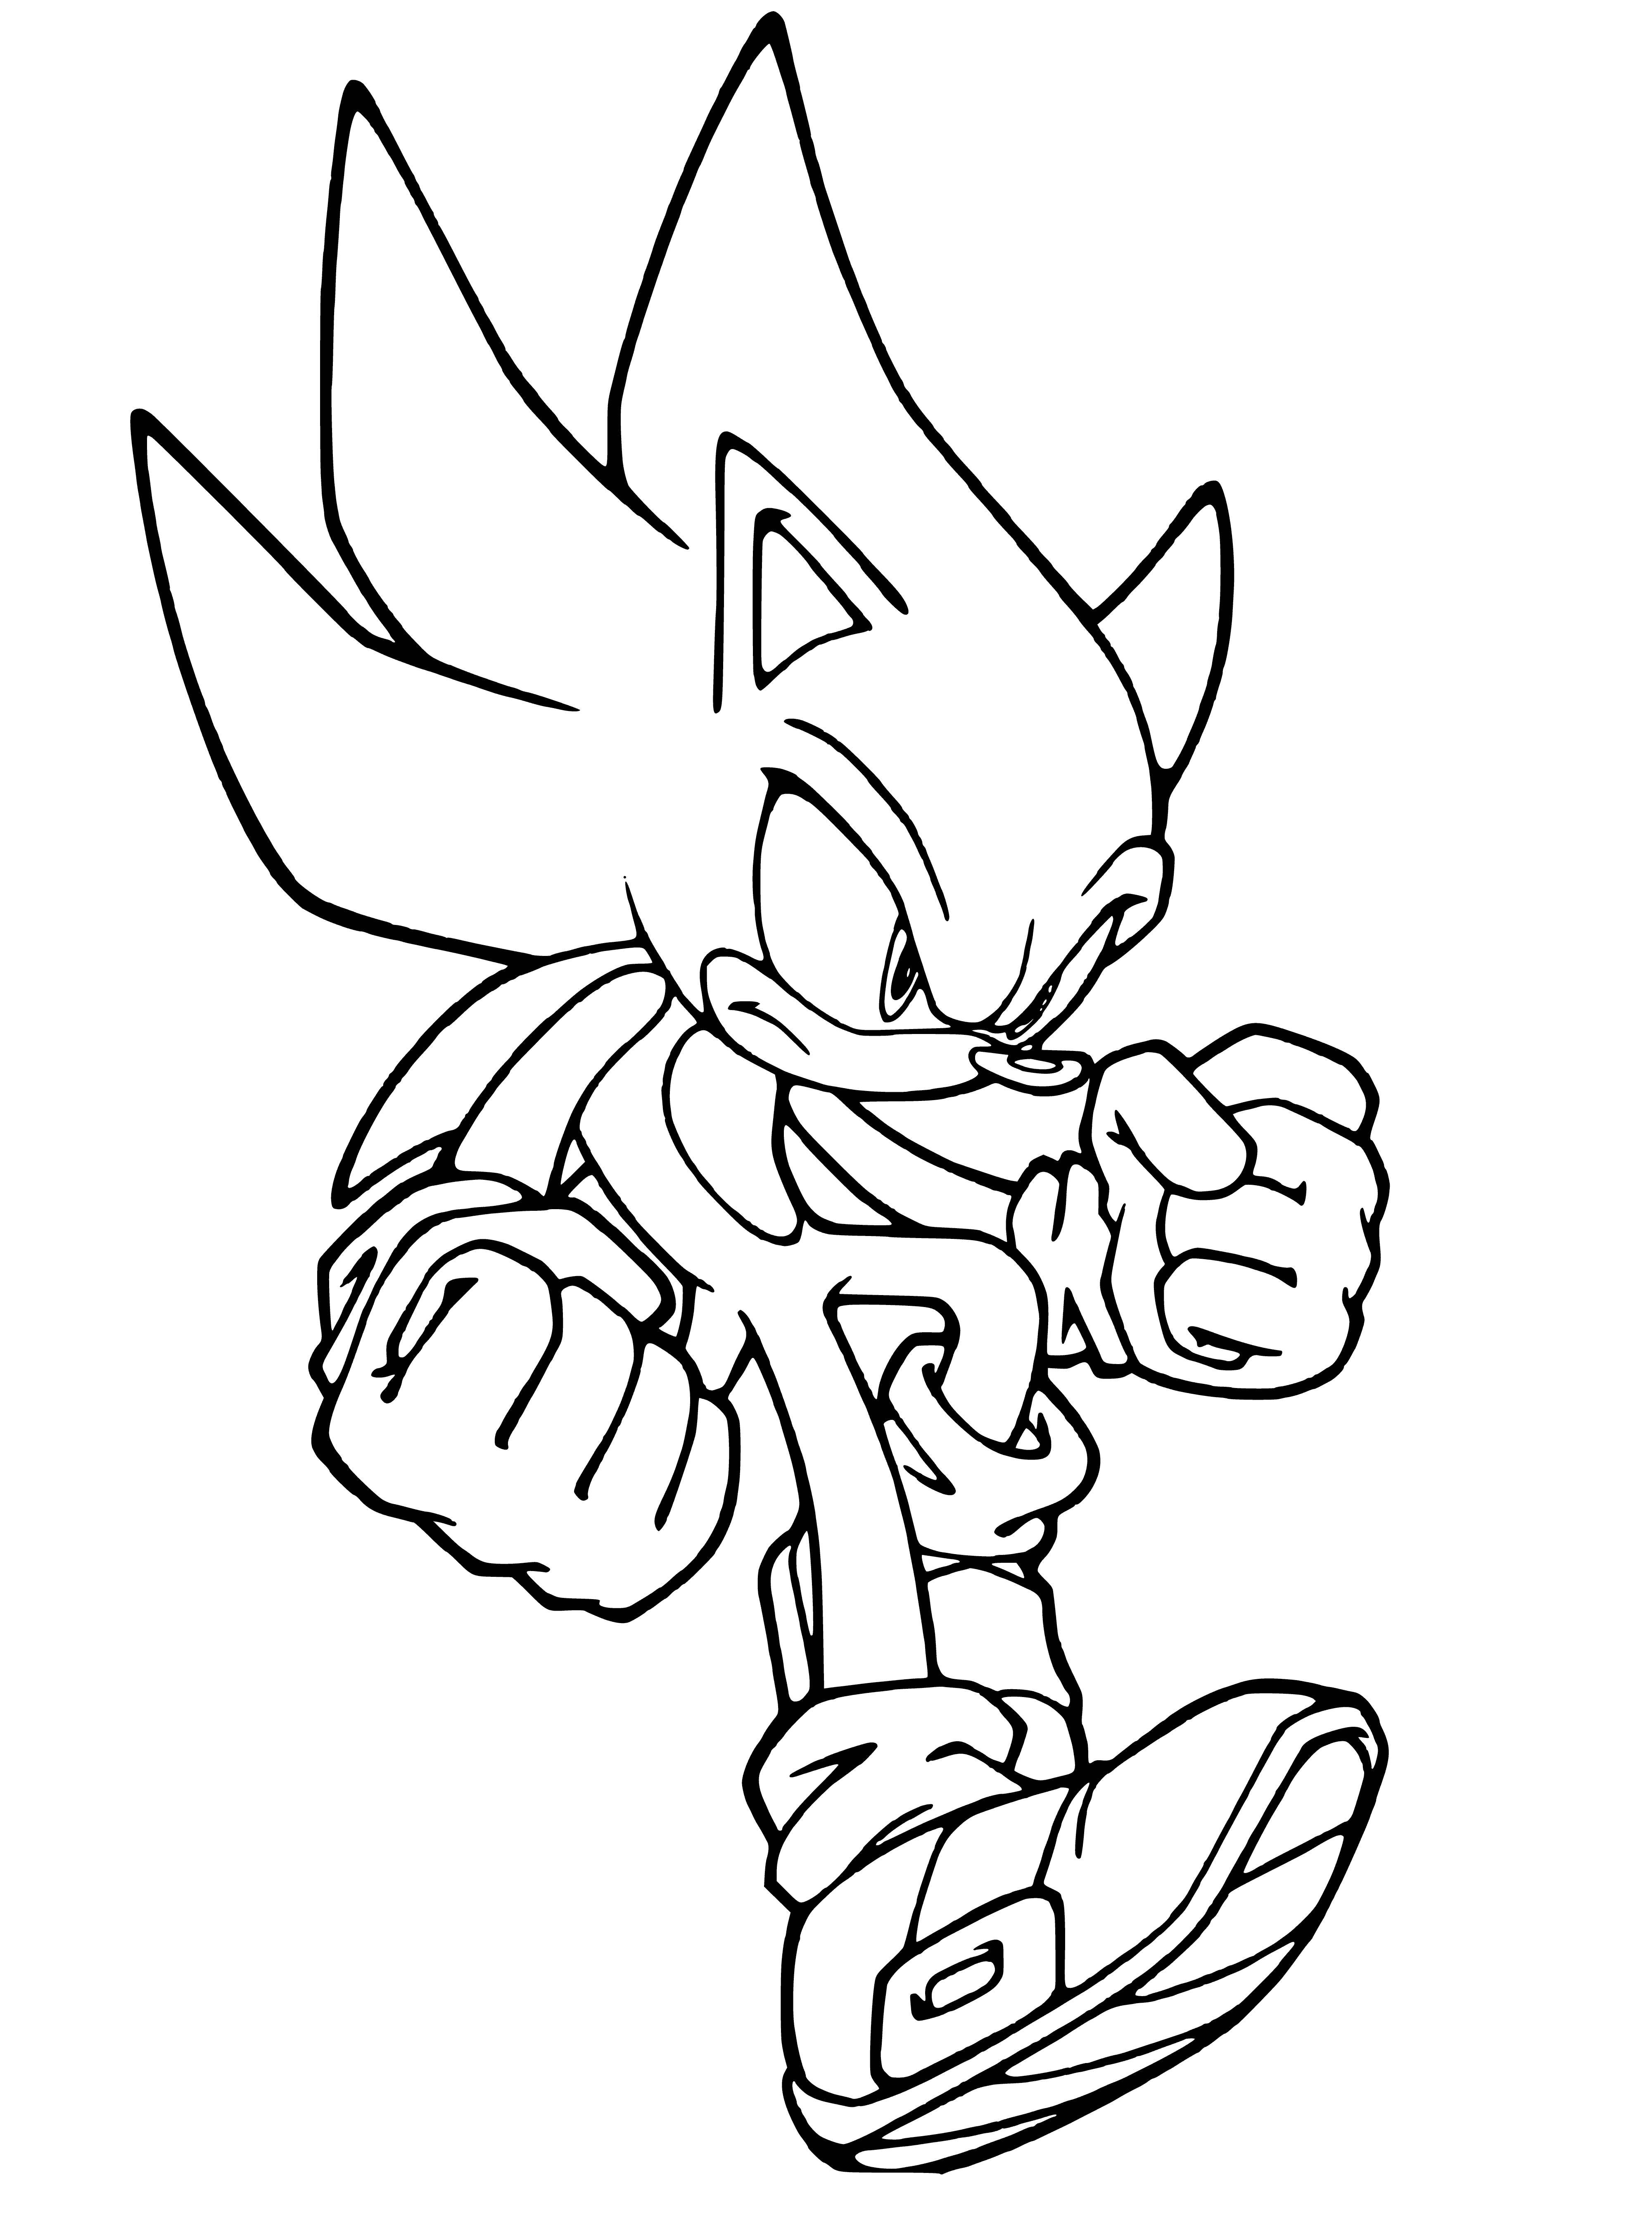 coloring page: A large blue Hedgehog with yellow eyes, red shoes & spikes stands on a gold ring with a blue center on a green hill with a blue sky.